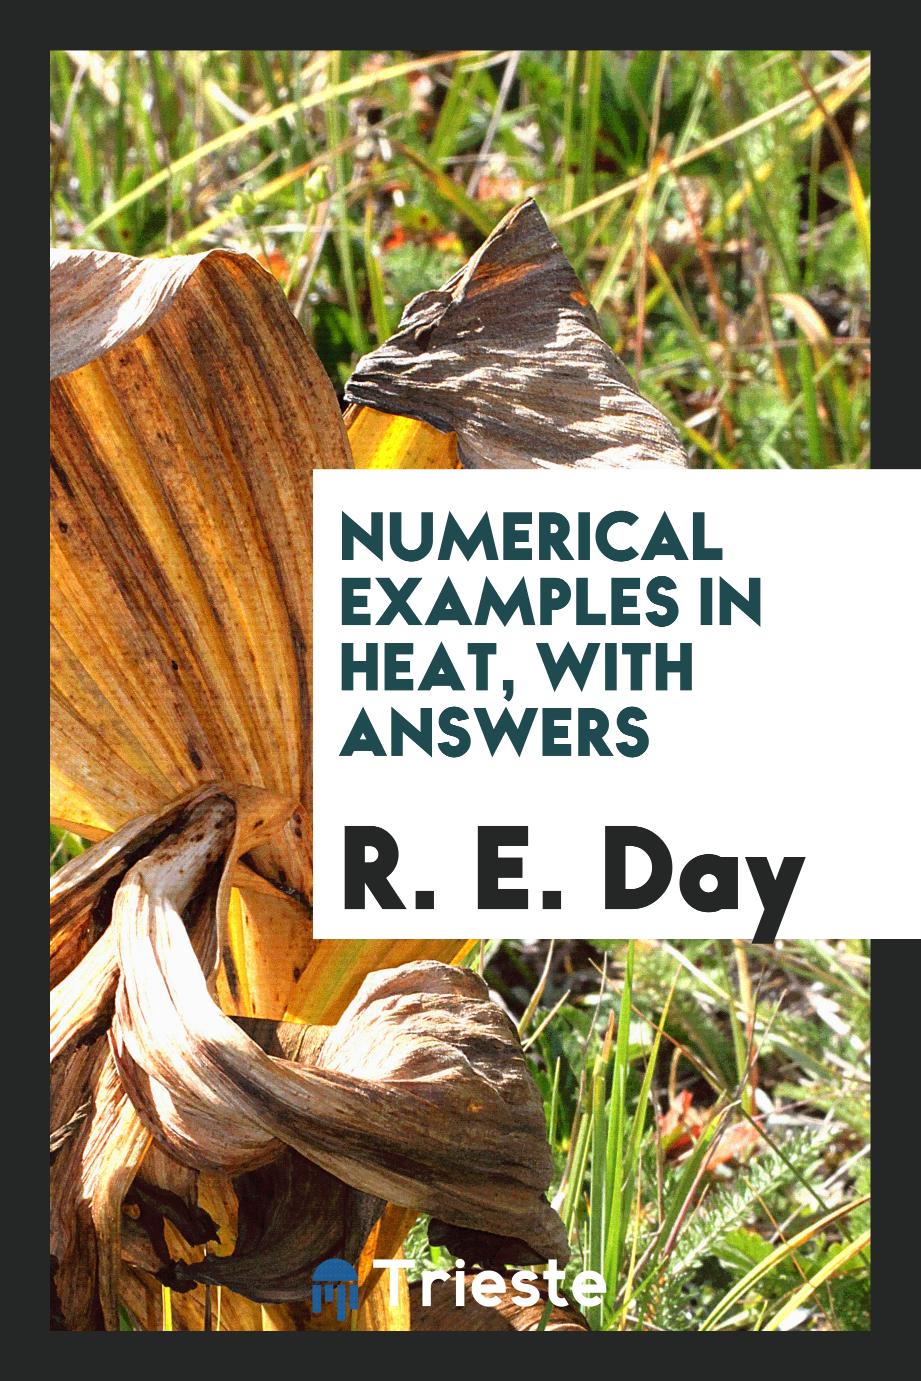 Numerical examples in heat, with answers